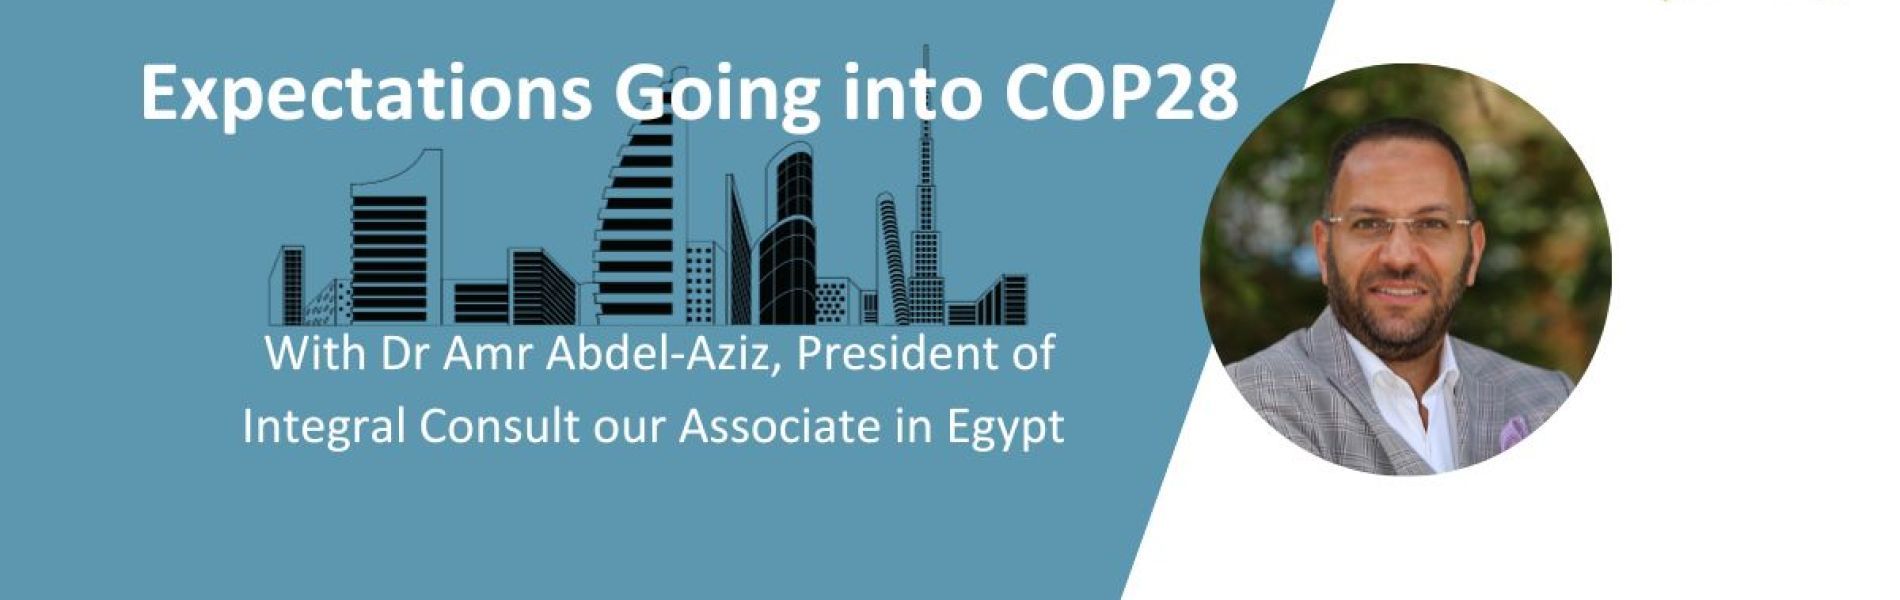 COP28 expectations